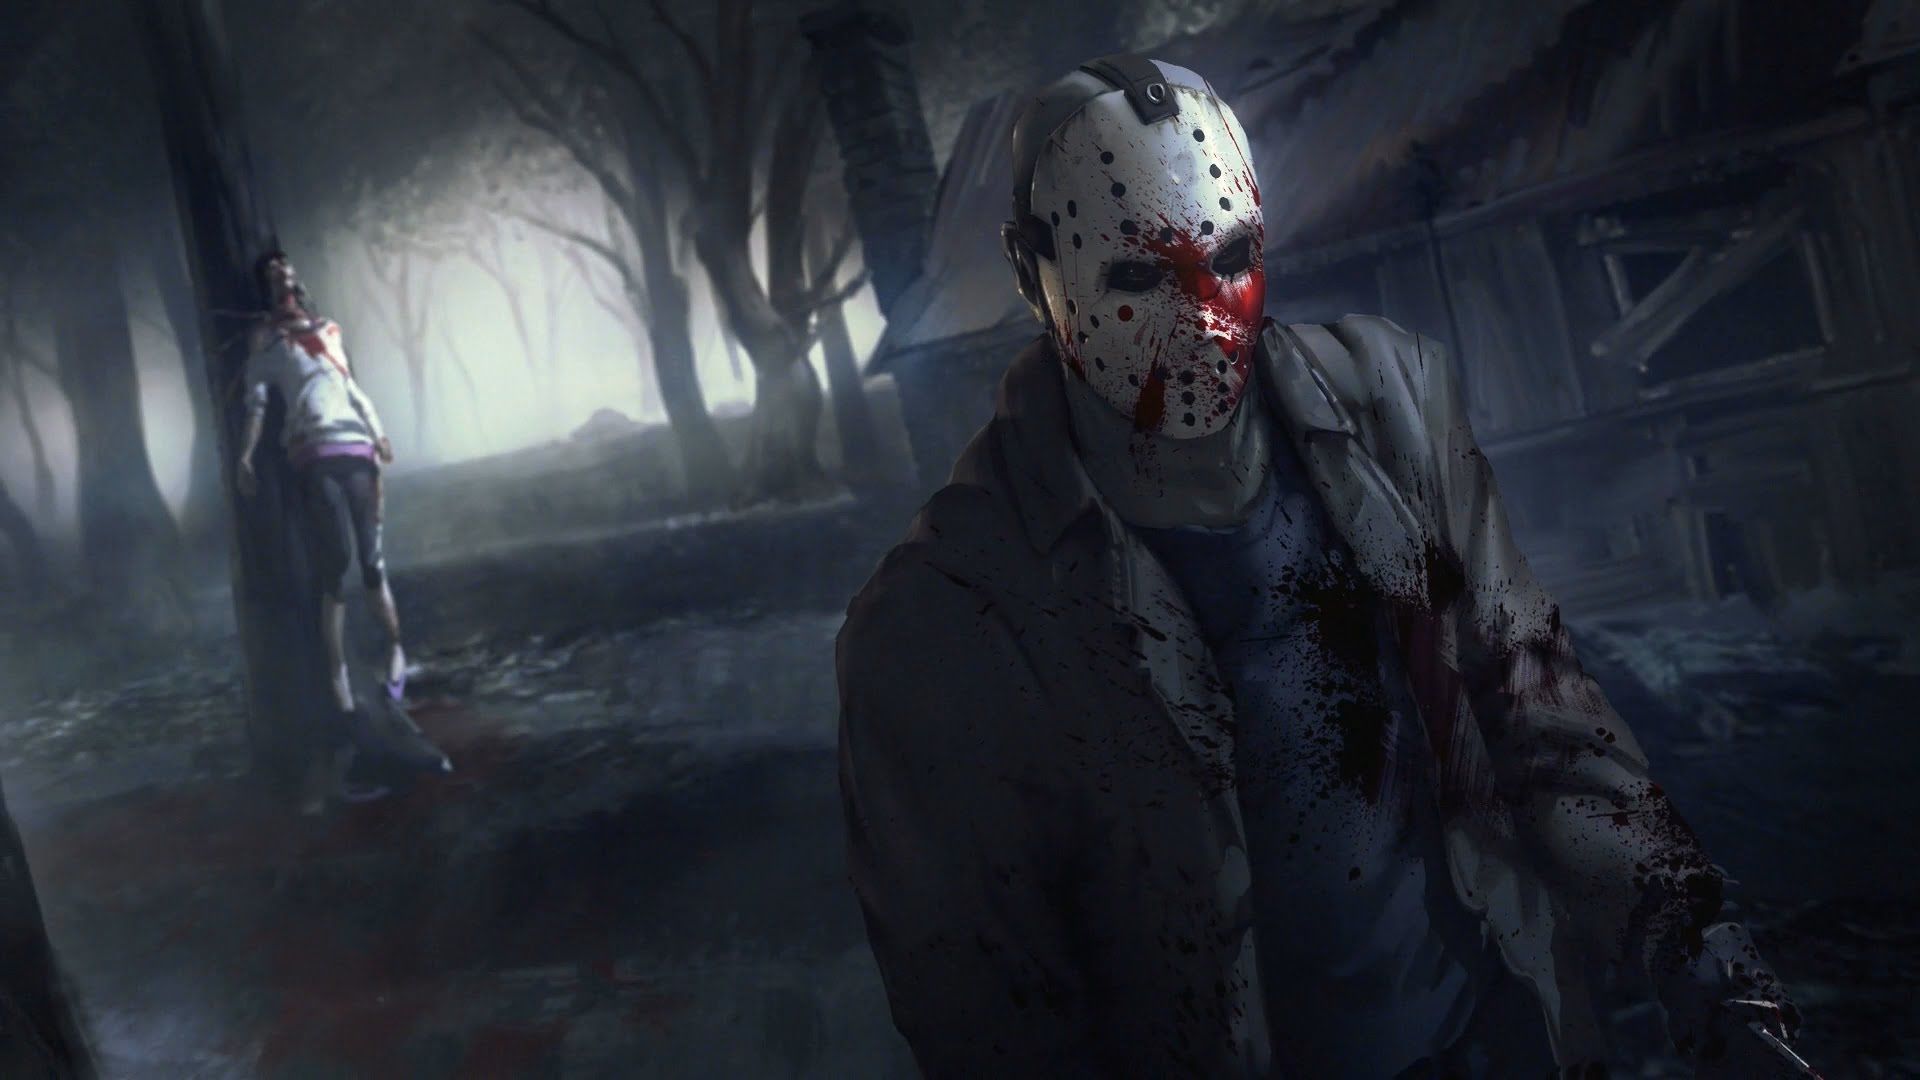 friday the 13th game bully